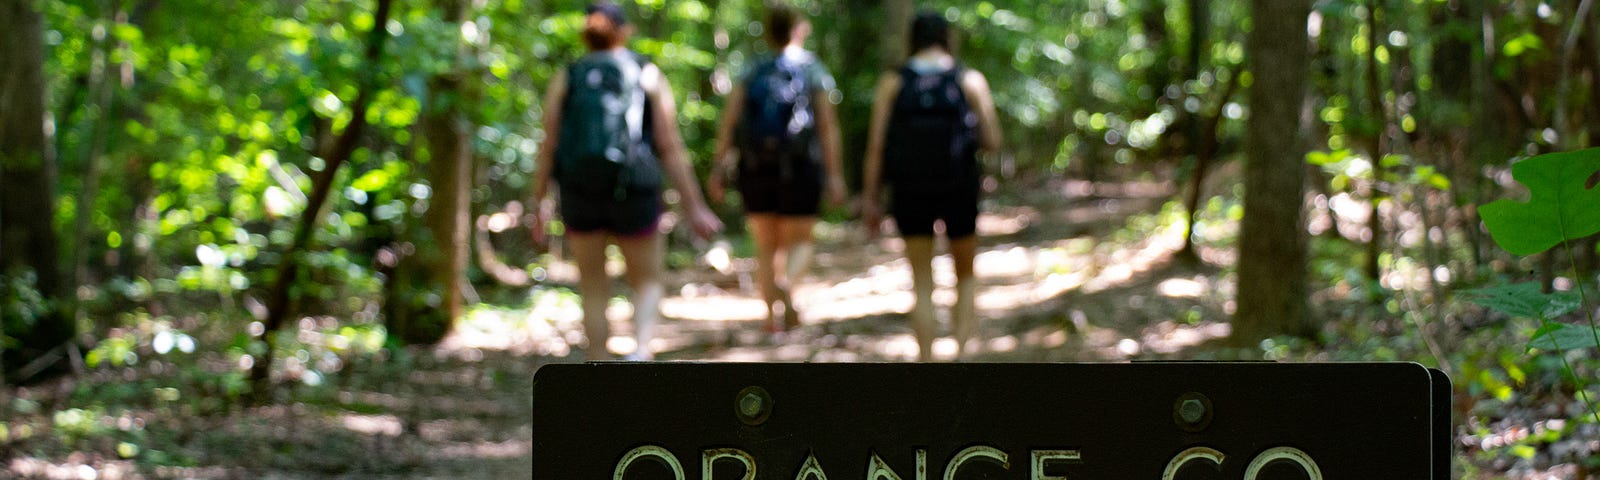 The NC State Park-sanctioned sign “Orange County” designating the line in the trail between Durham and Orange counties.